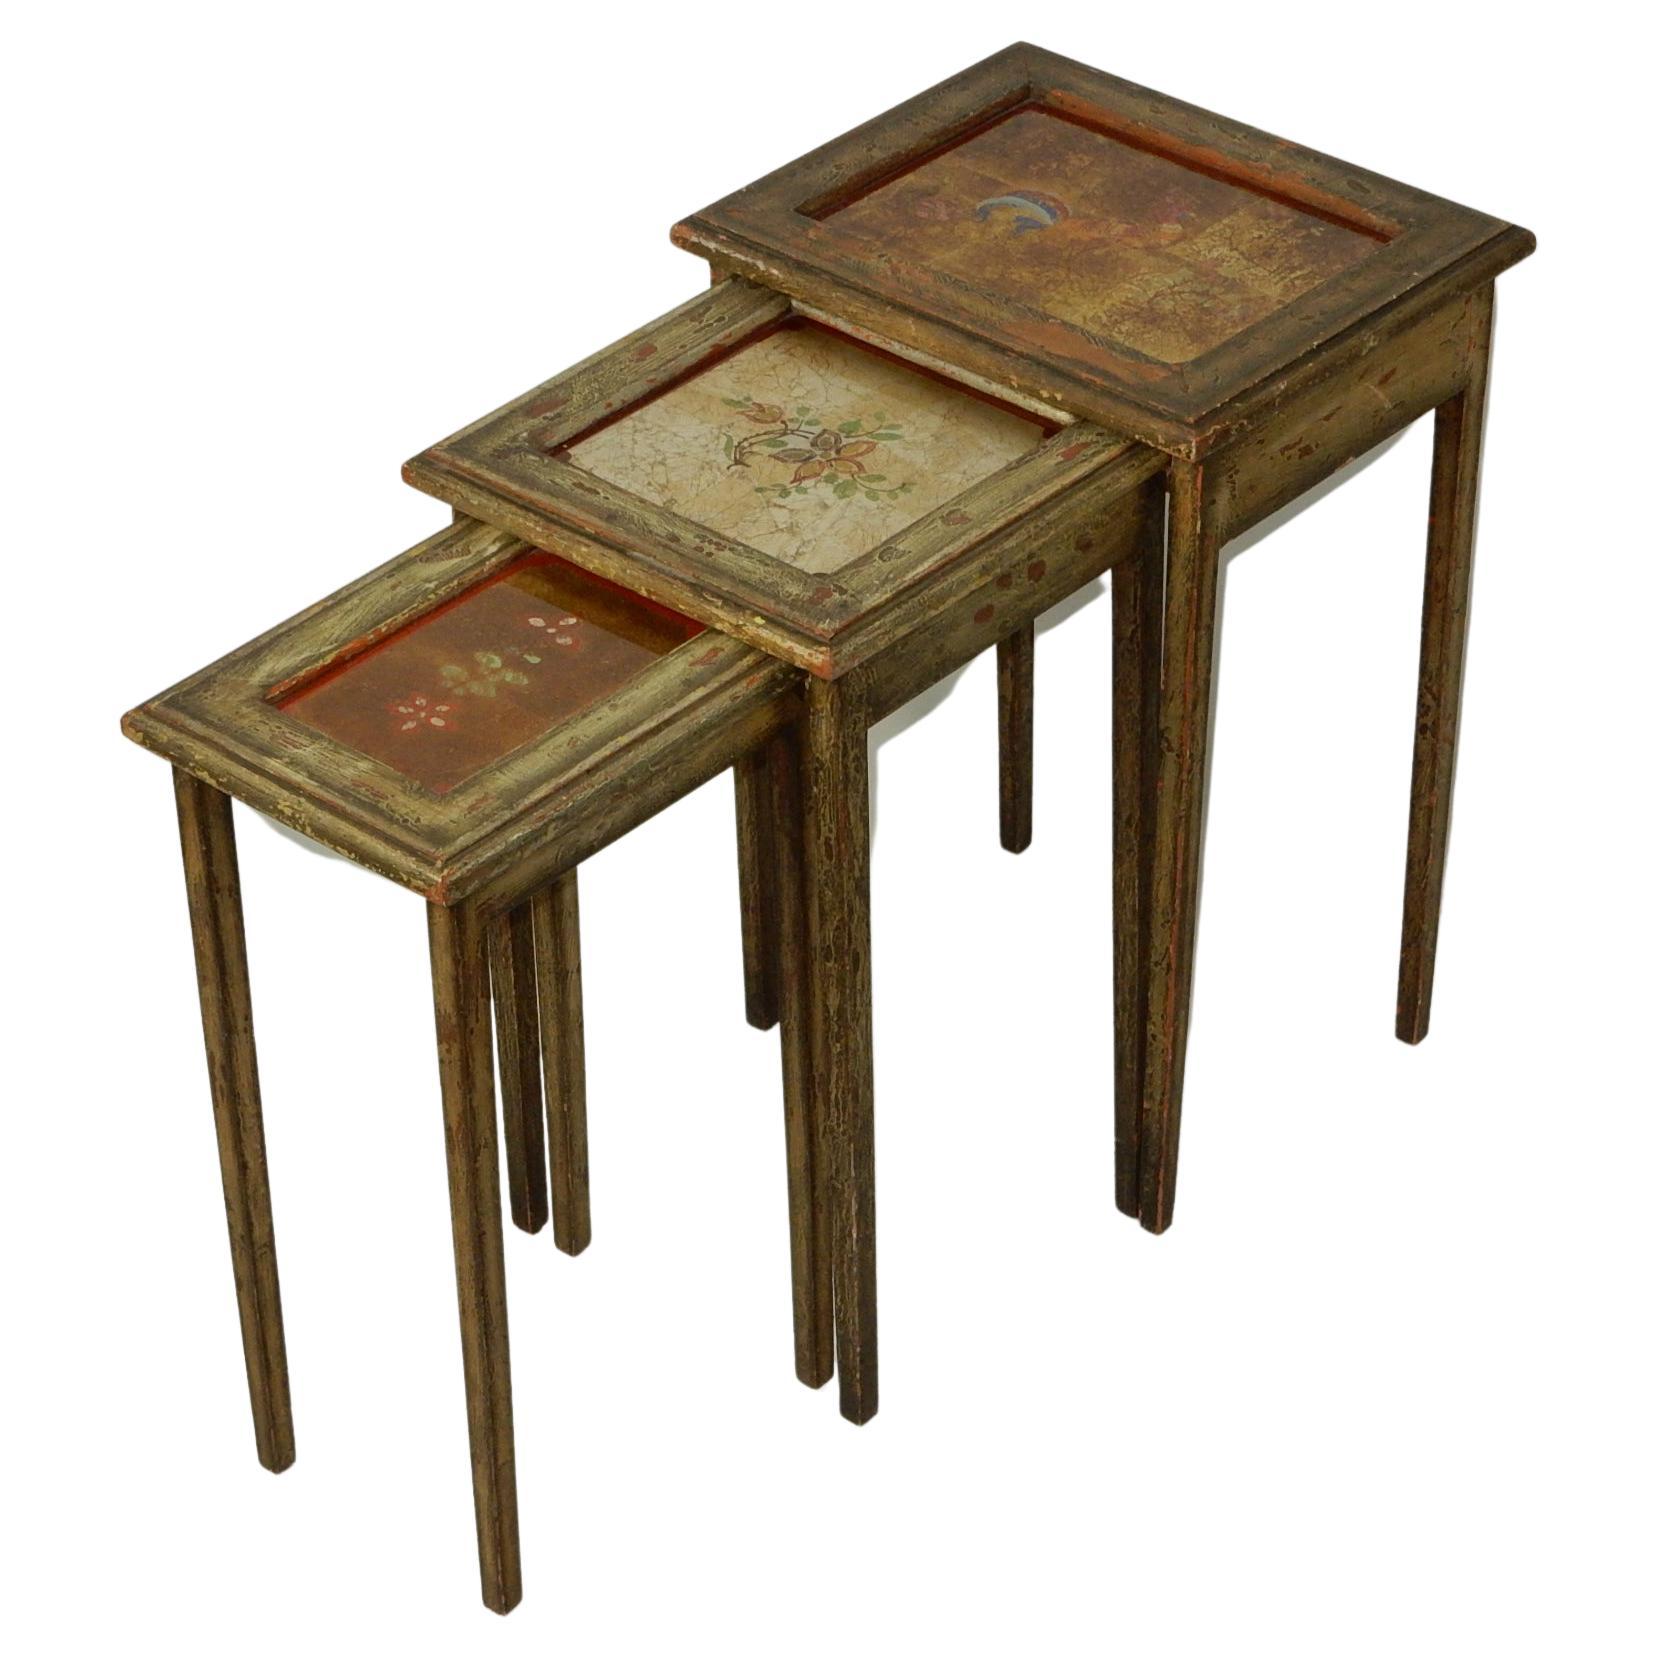 Unique, one of a kind, circa 1940's artistic nesting table set.
Reverse painted floral design glass tops with gold or silver leaf background.
Frame and legs have textured painted surface.

 